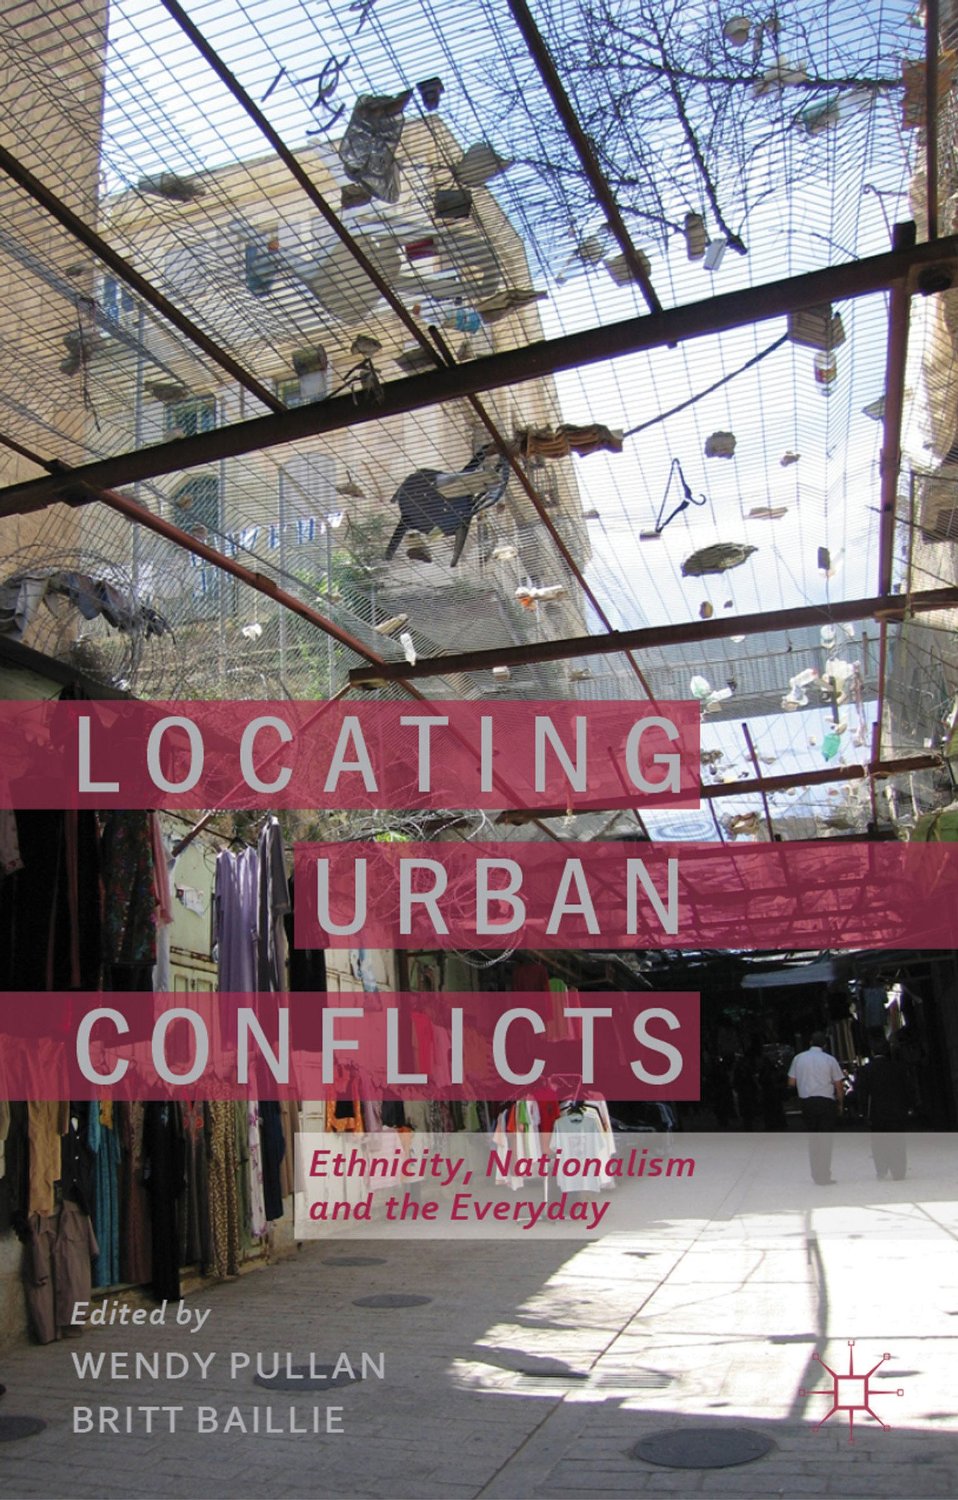 Book covers: Locating Urban Conflicts